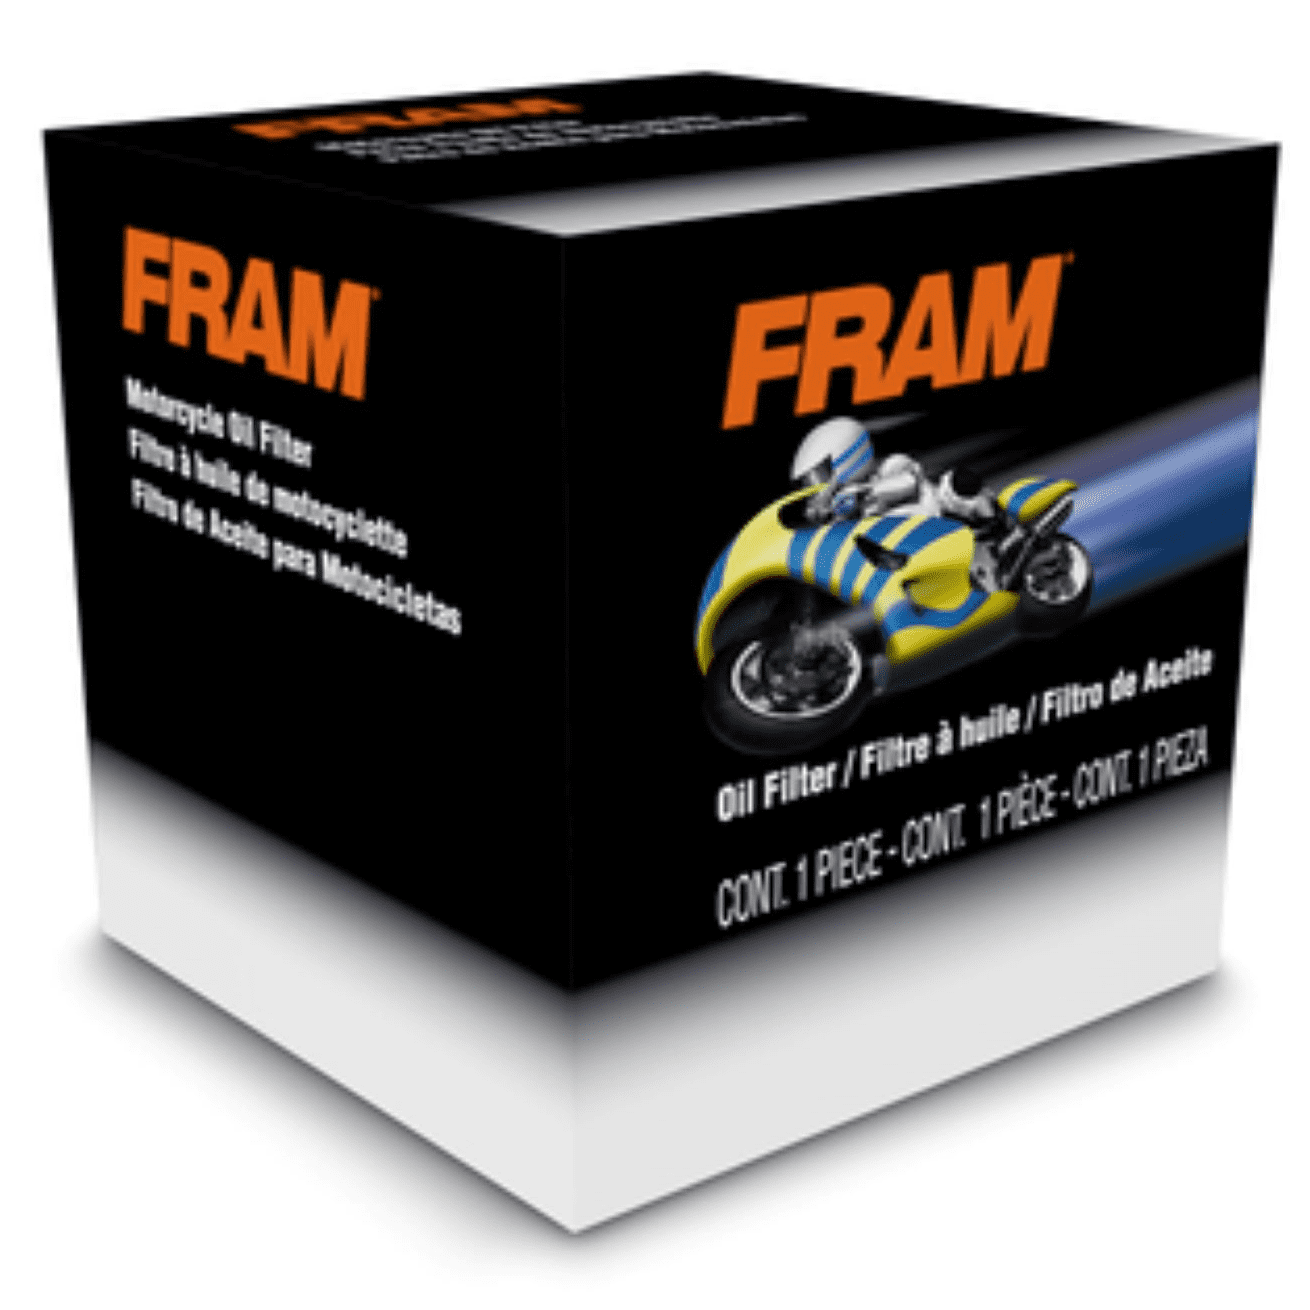 FRAM Engine Oil Filter, PH6018 for Motorcycles and ATVs